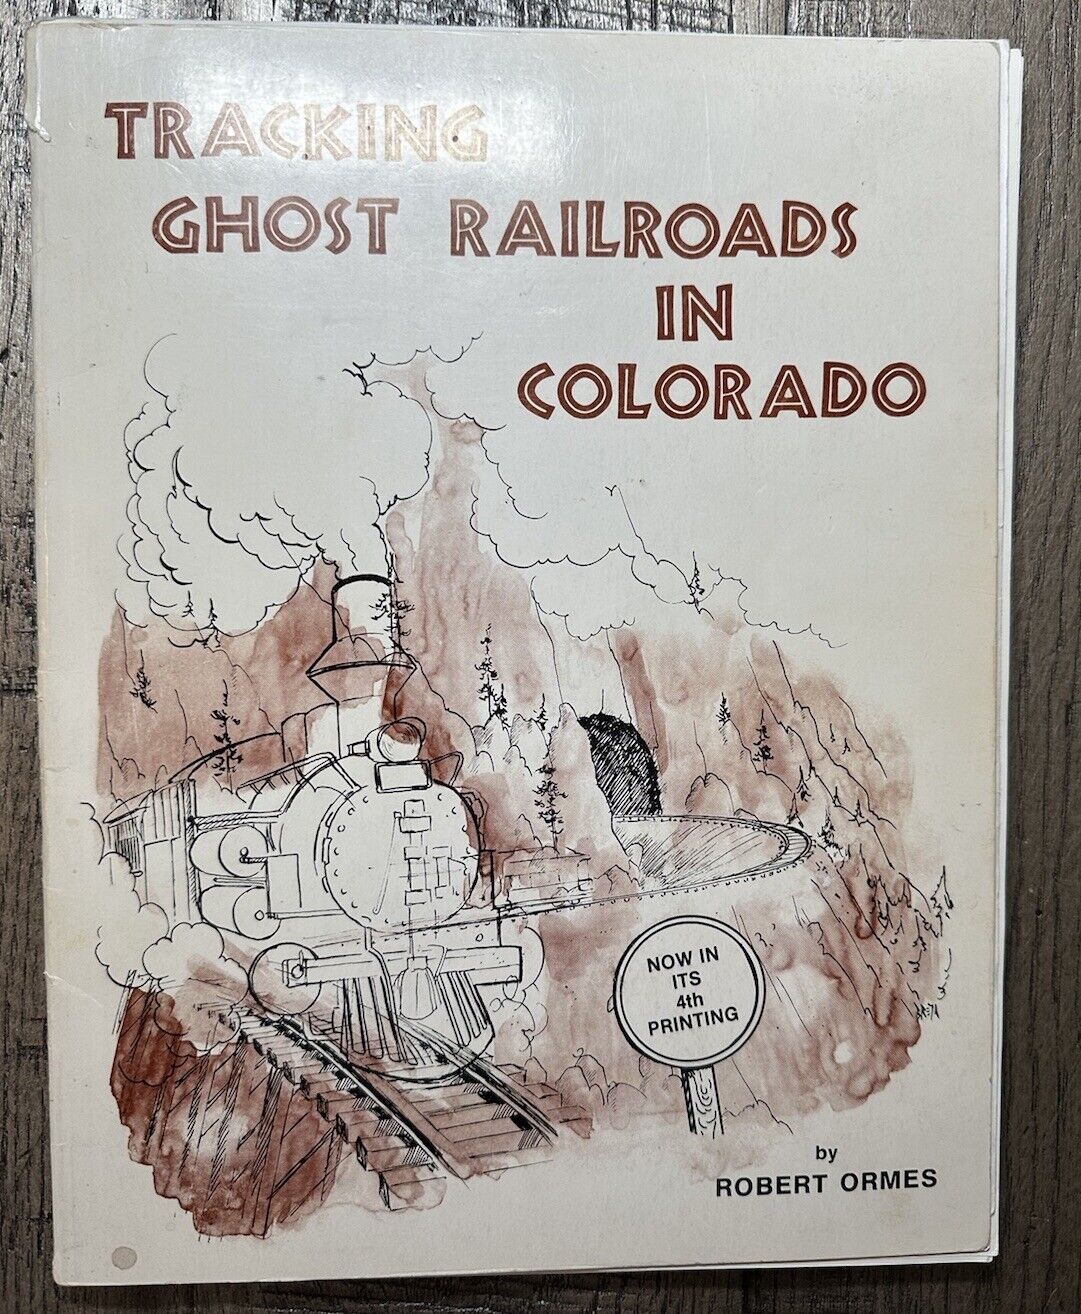 Tracking Ghost Railroads In Colorado, By Robert Ormes 1975 Edition SC